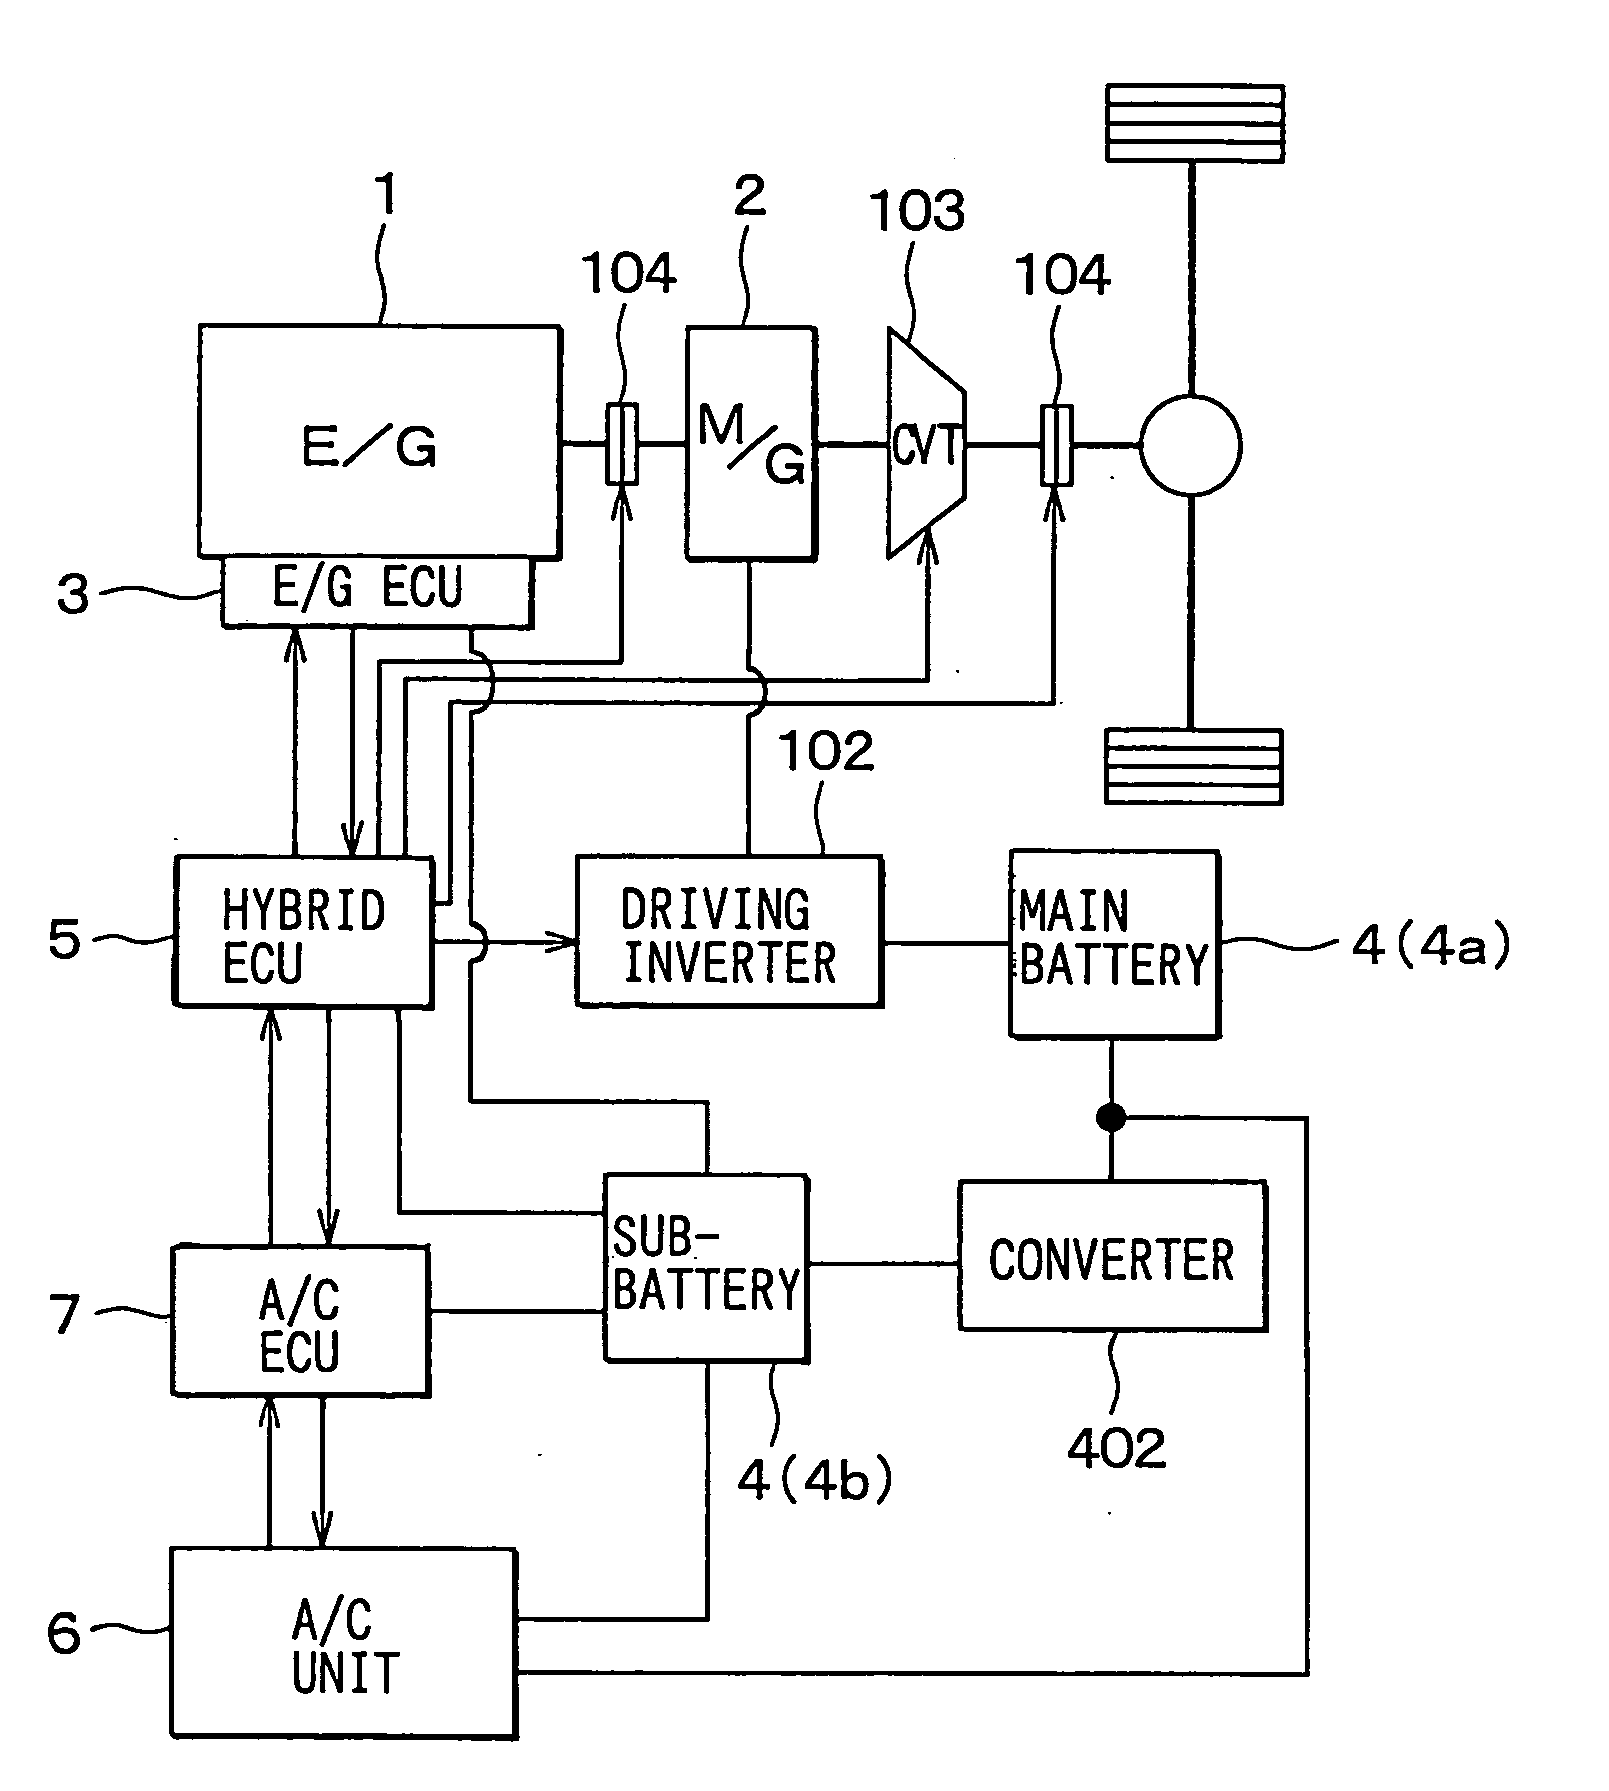 Compressor control system for vehicle air conditioner